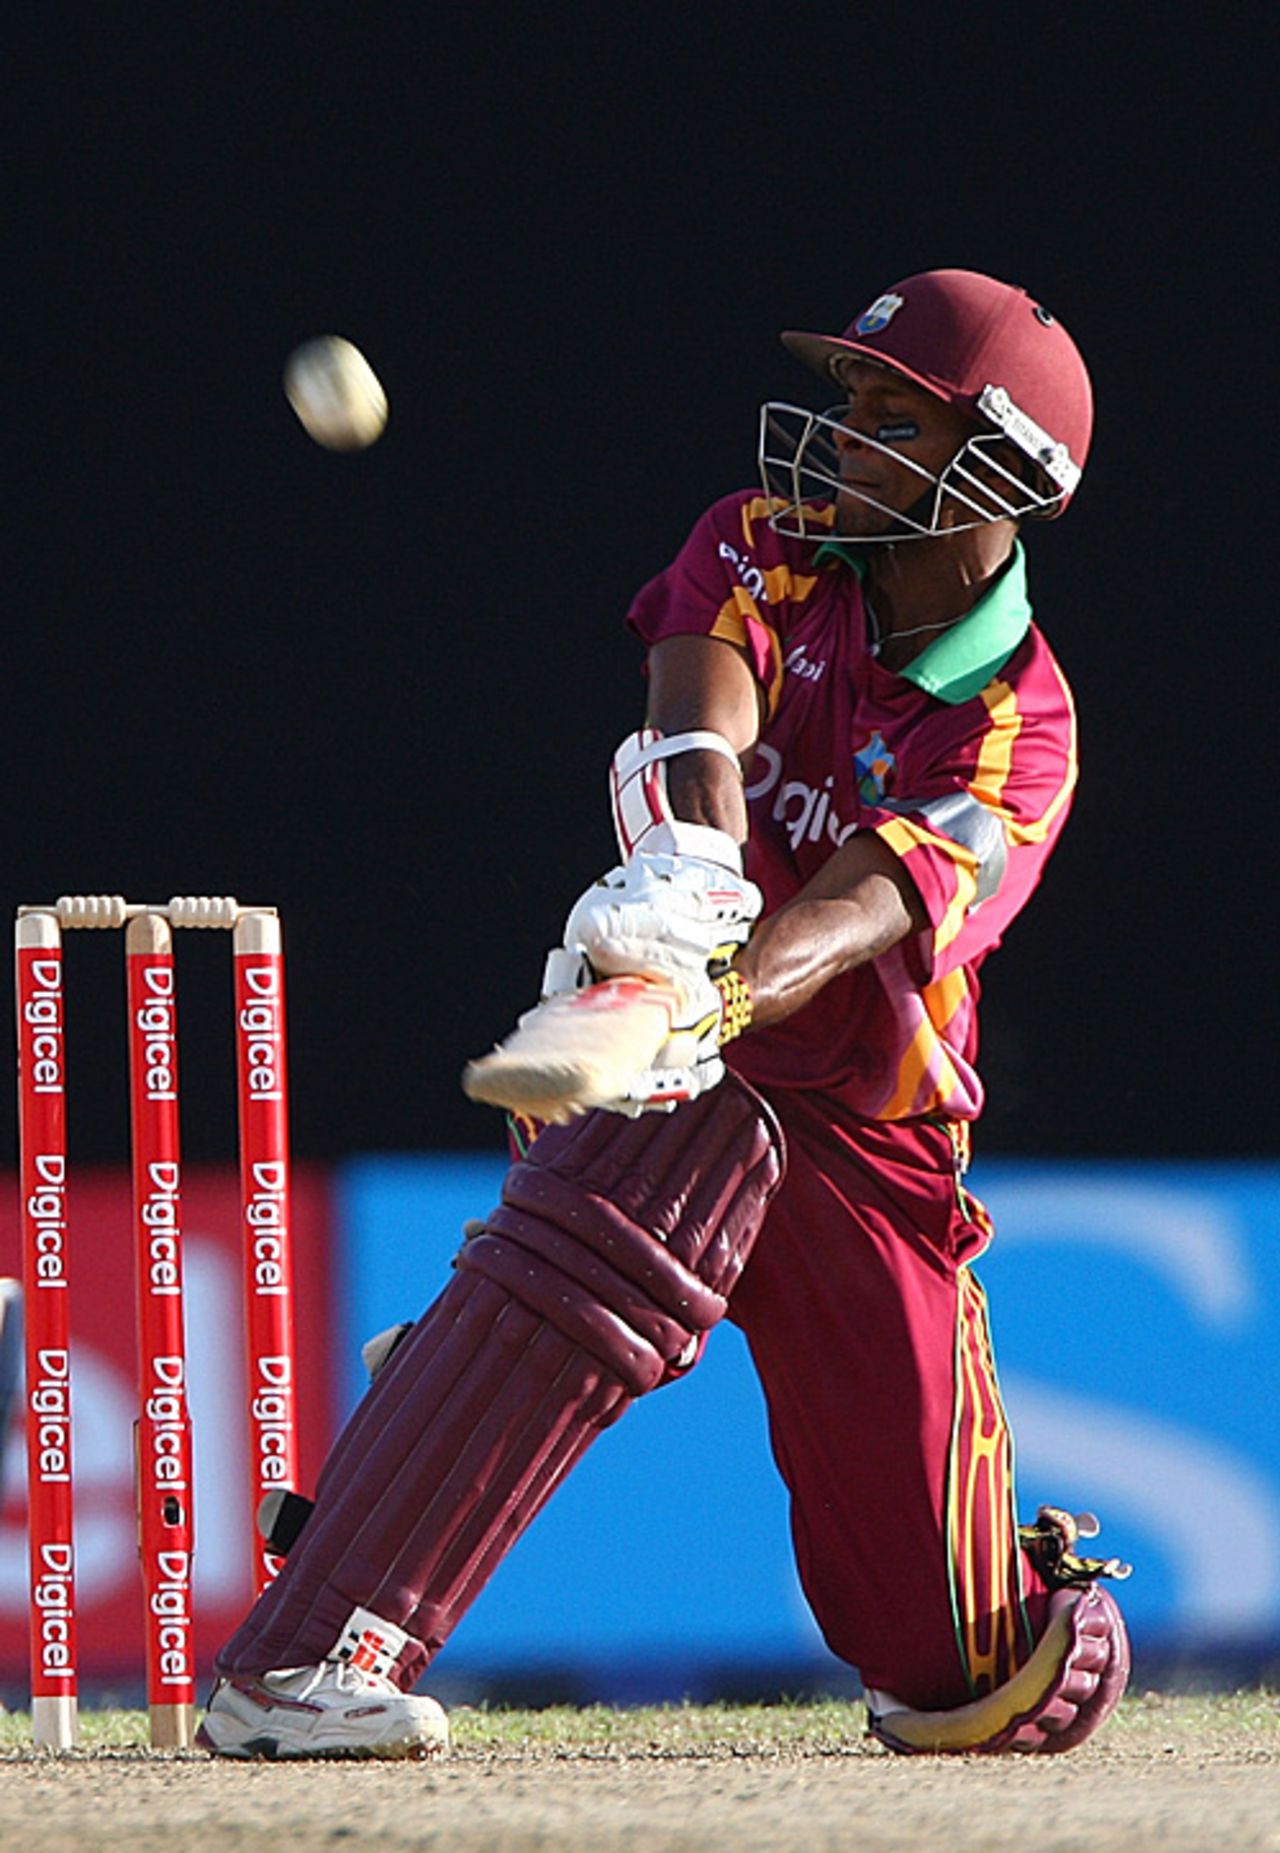 Shivnarine Chanderpaul, down on one knee, executes a remarkable paddle for six off Steve Harmison, West Indies v England, 1st ODI, Providence, March 20, 2009